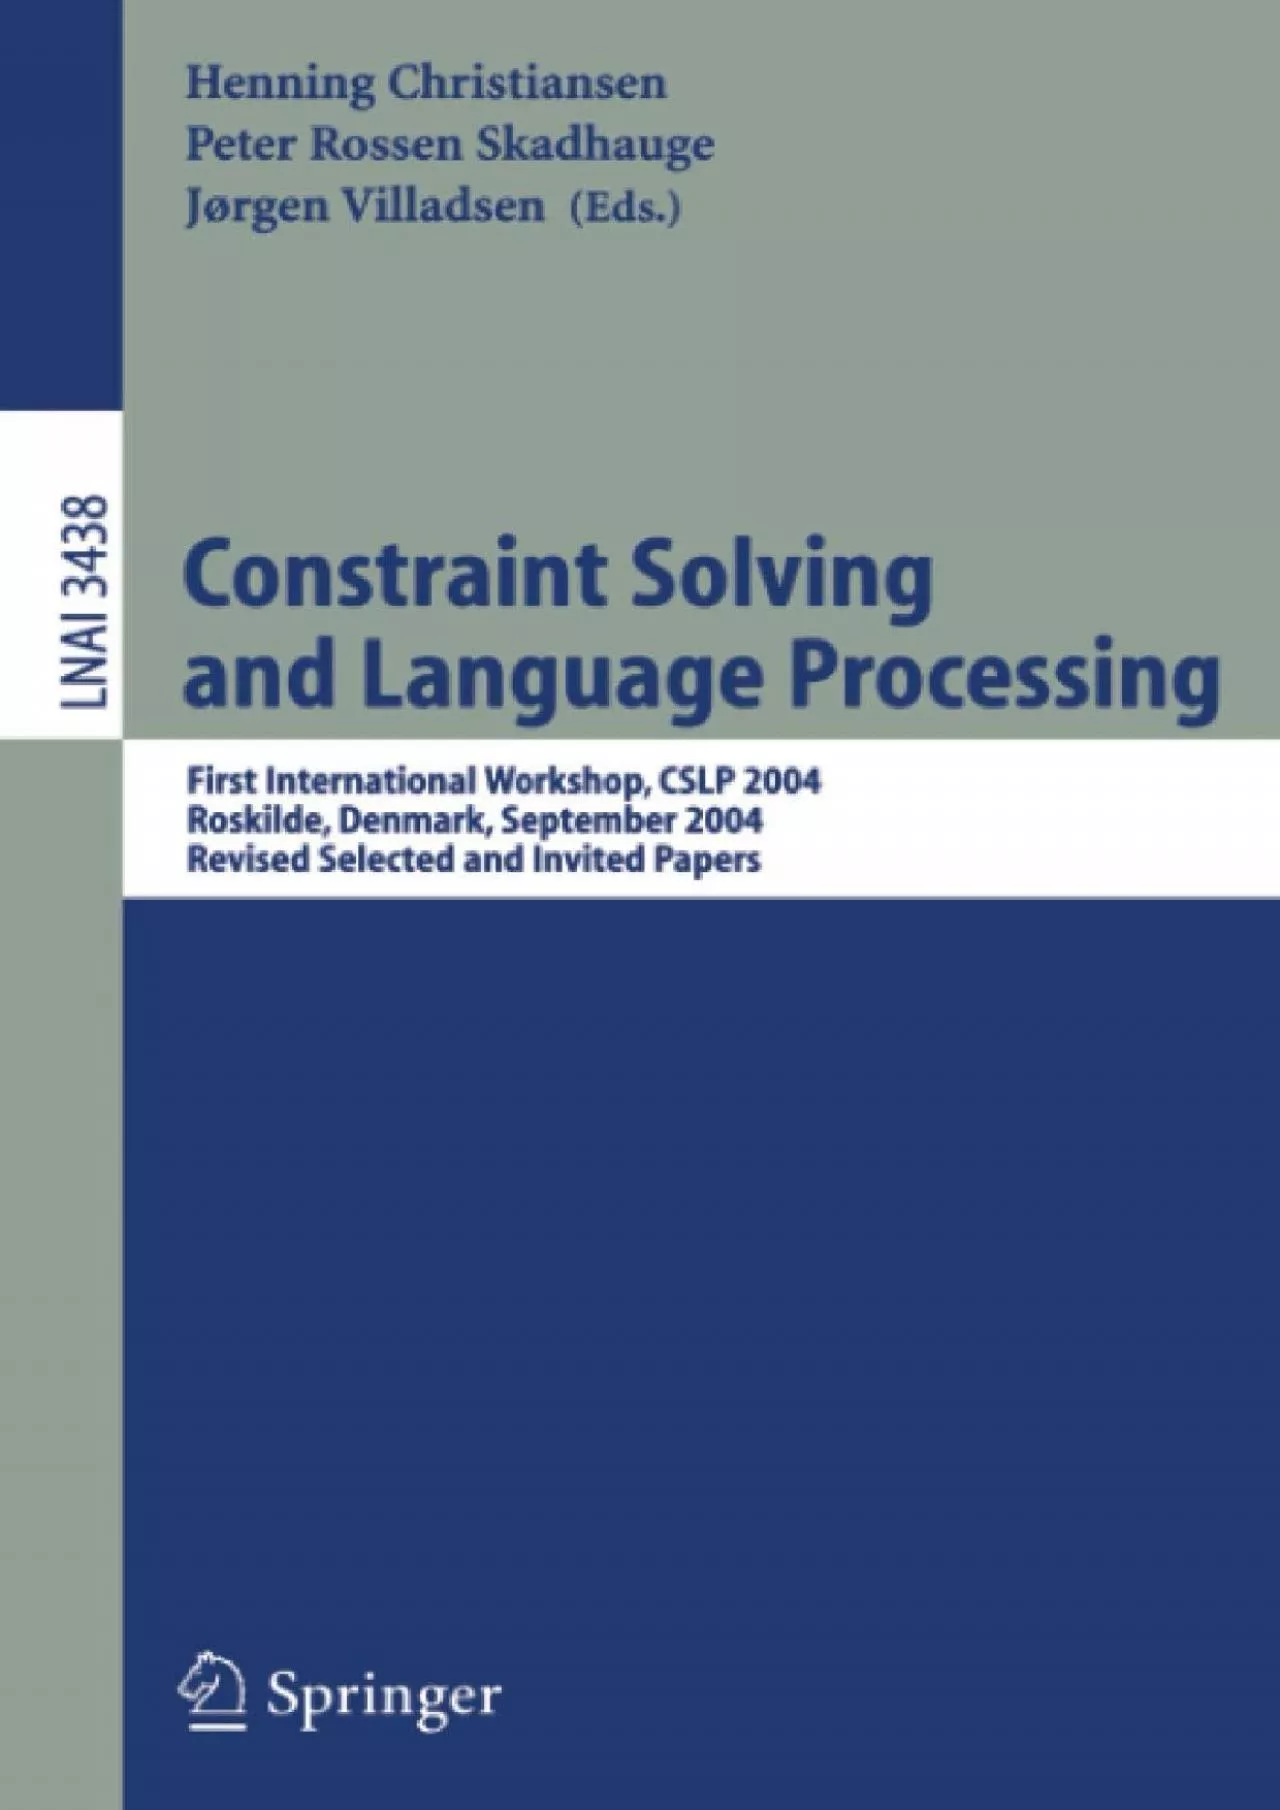 [BEST]-Constraint Solving and Language Processing: First International Workshop, CSLP